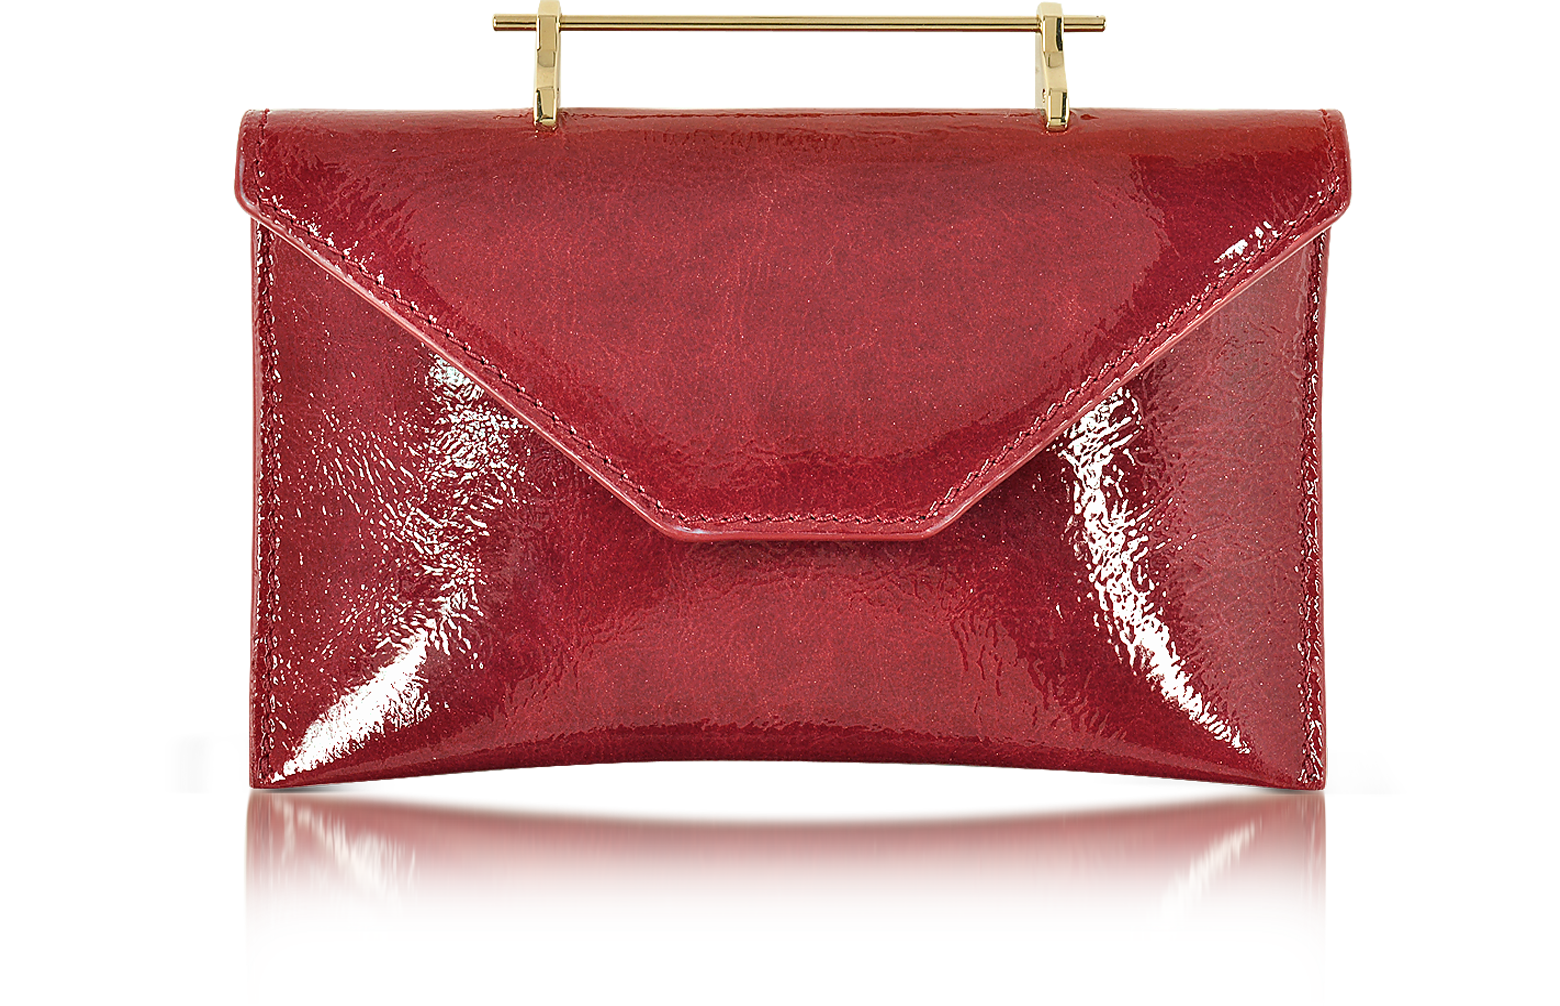 M2Malletier Annabelle Lipstick Red Patent Leather Clutch w/Chain at ...